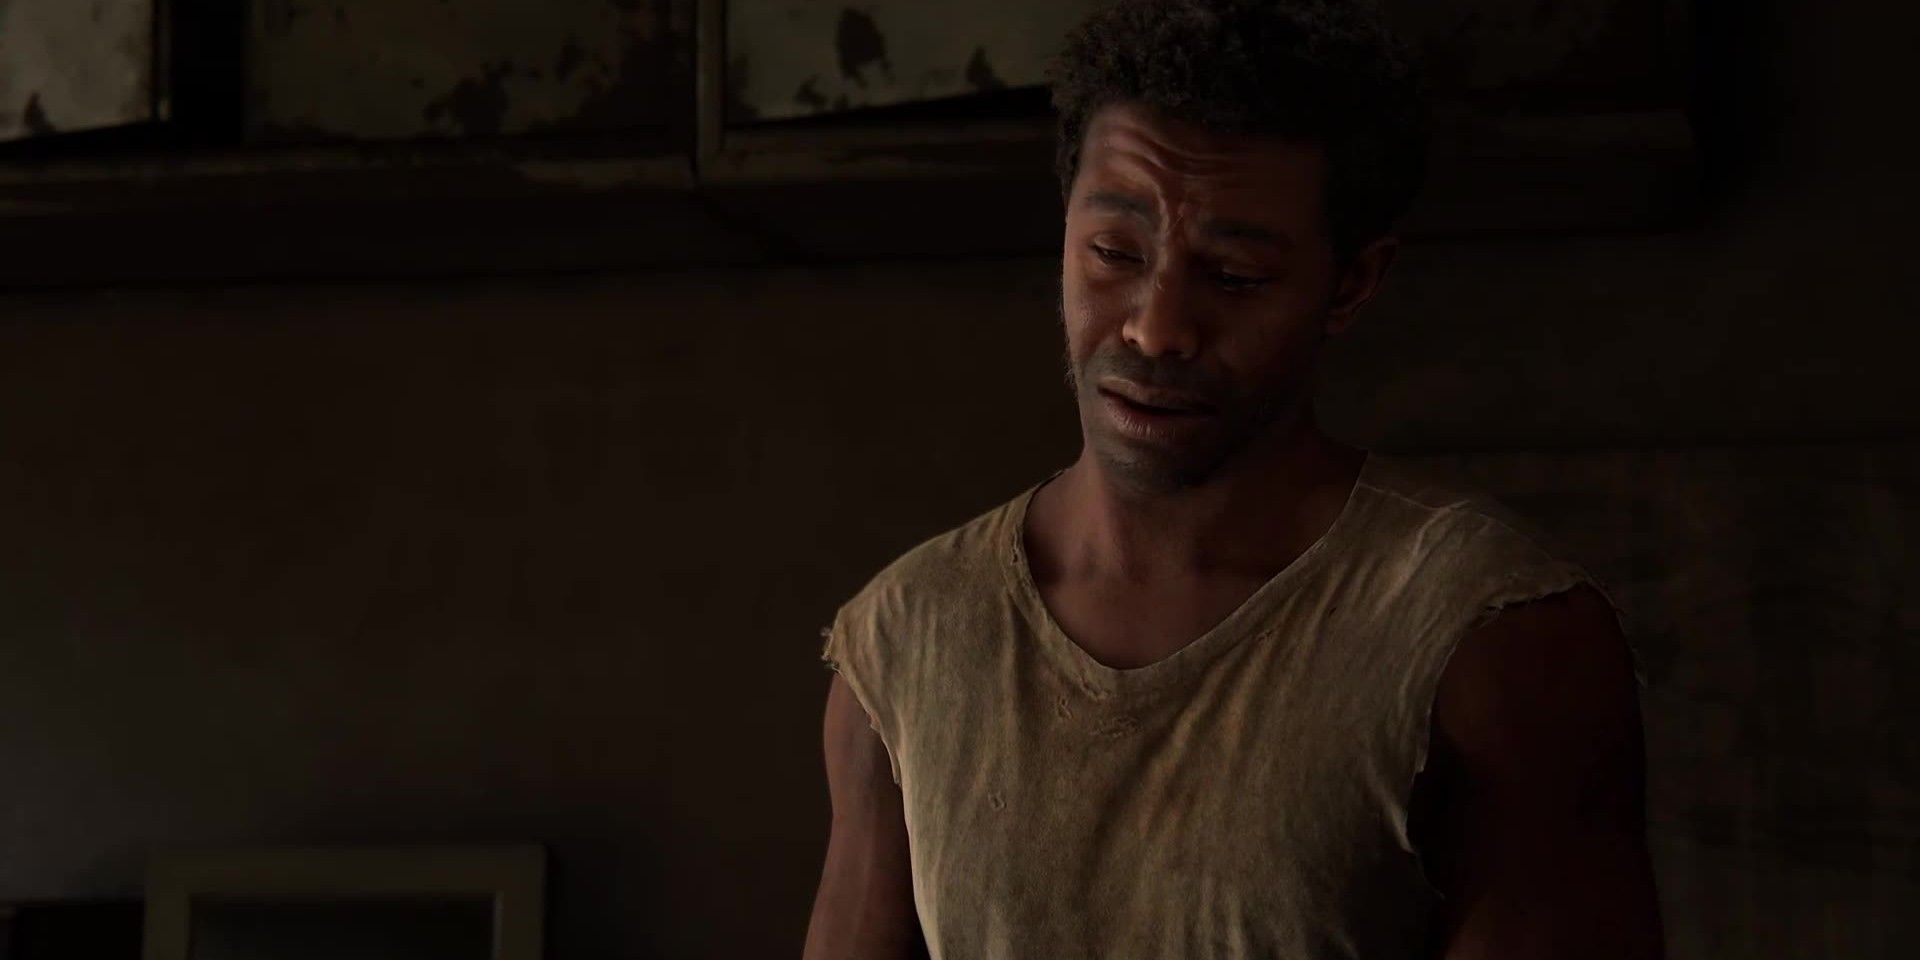 The Last of Us' Henry cries while weaing a dirty white T-shirt with cut-off sleeves.